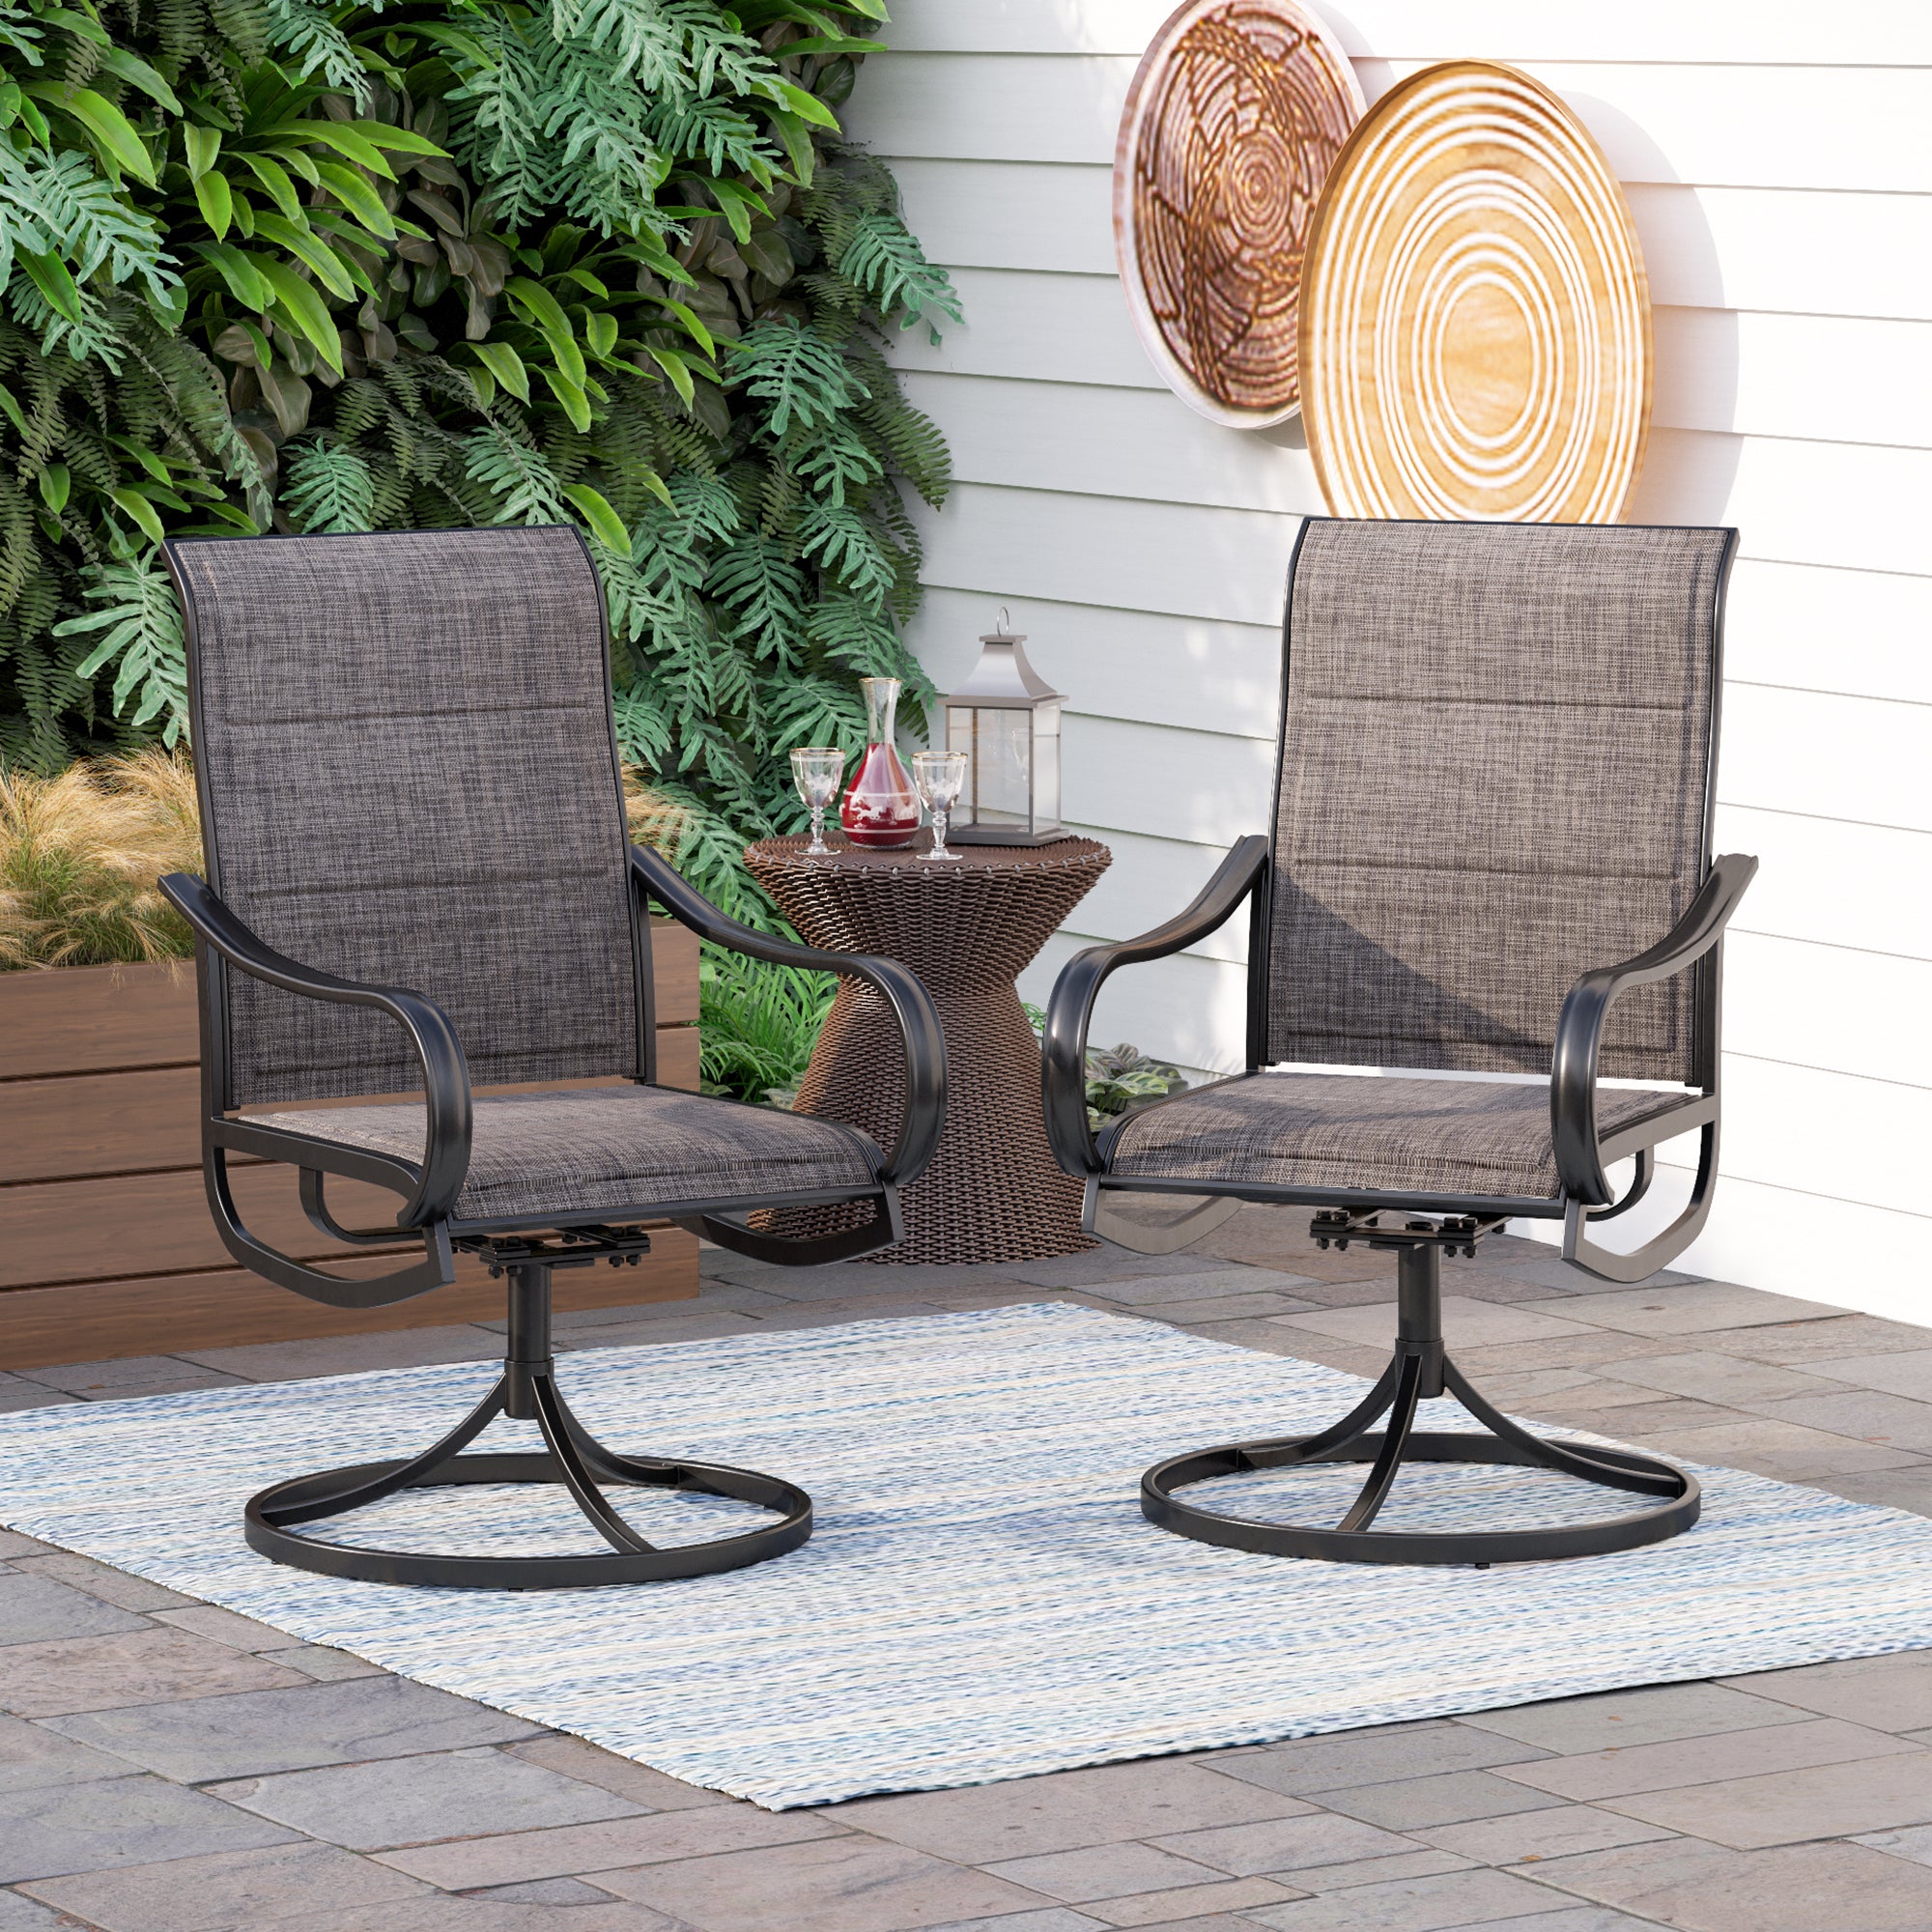 PHI VILLA Padded Patio Dining Chair with Steel Frame